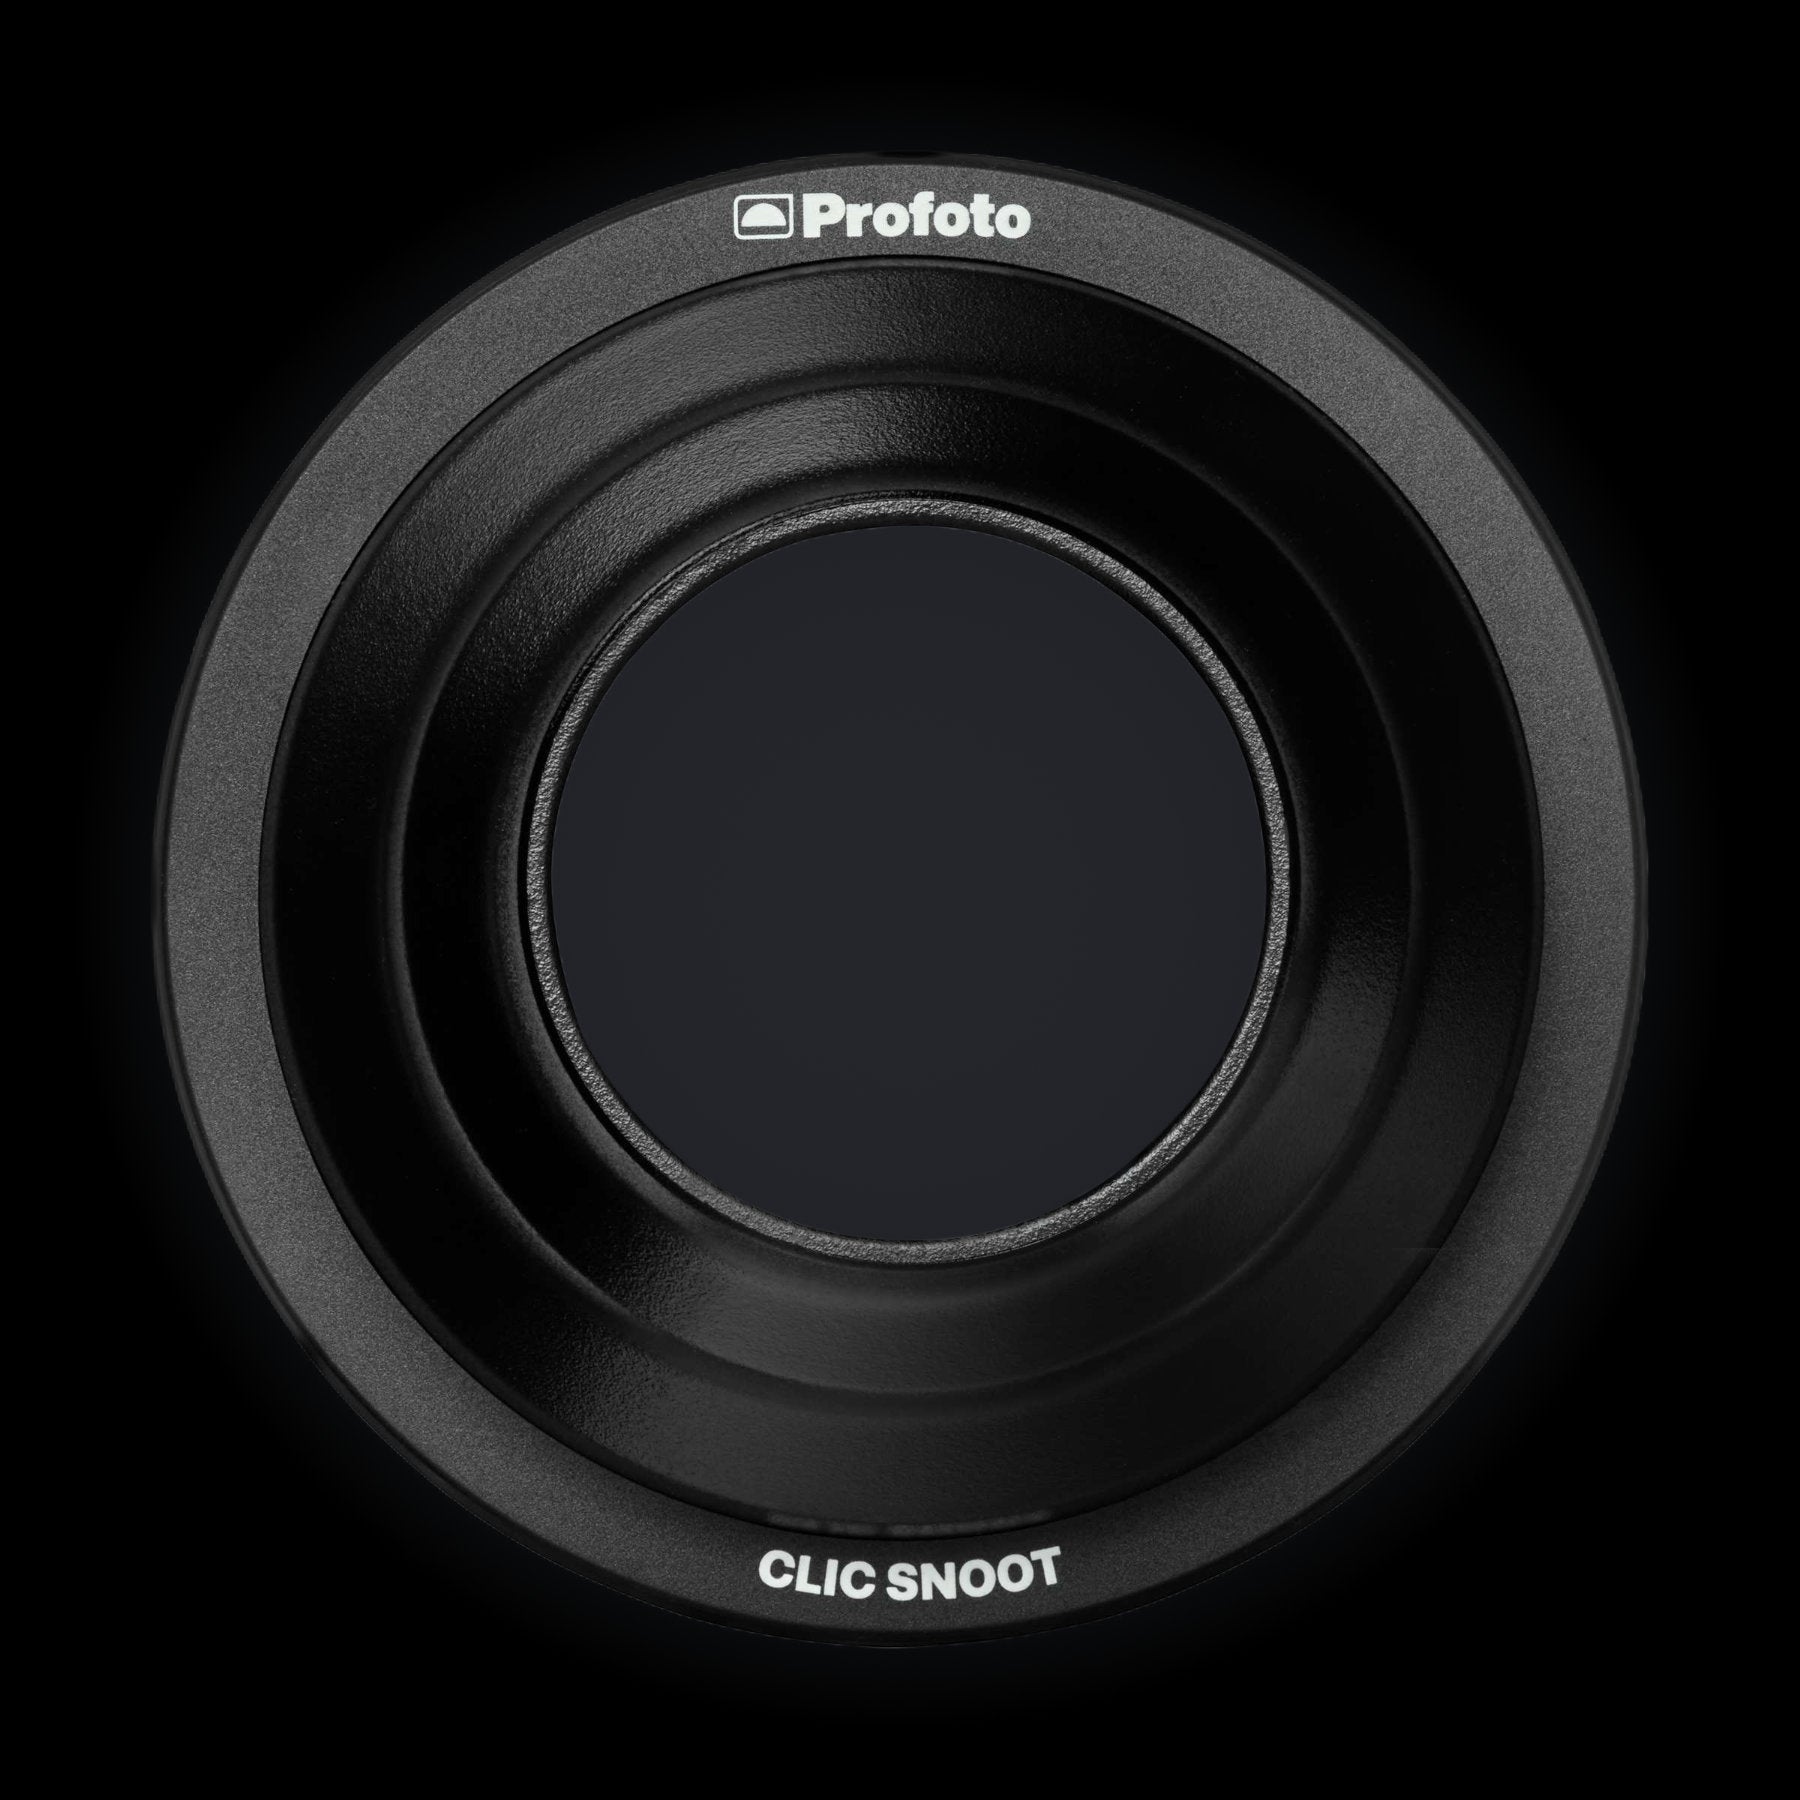 Buy Profoto Clic Snoot at Profoto NZ by Topic an authorised reseller